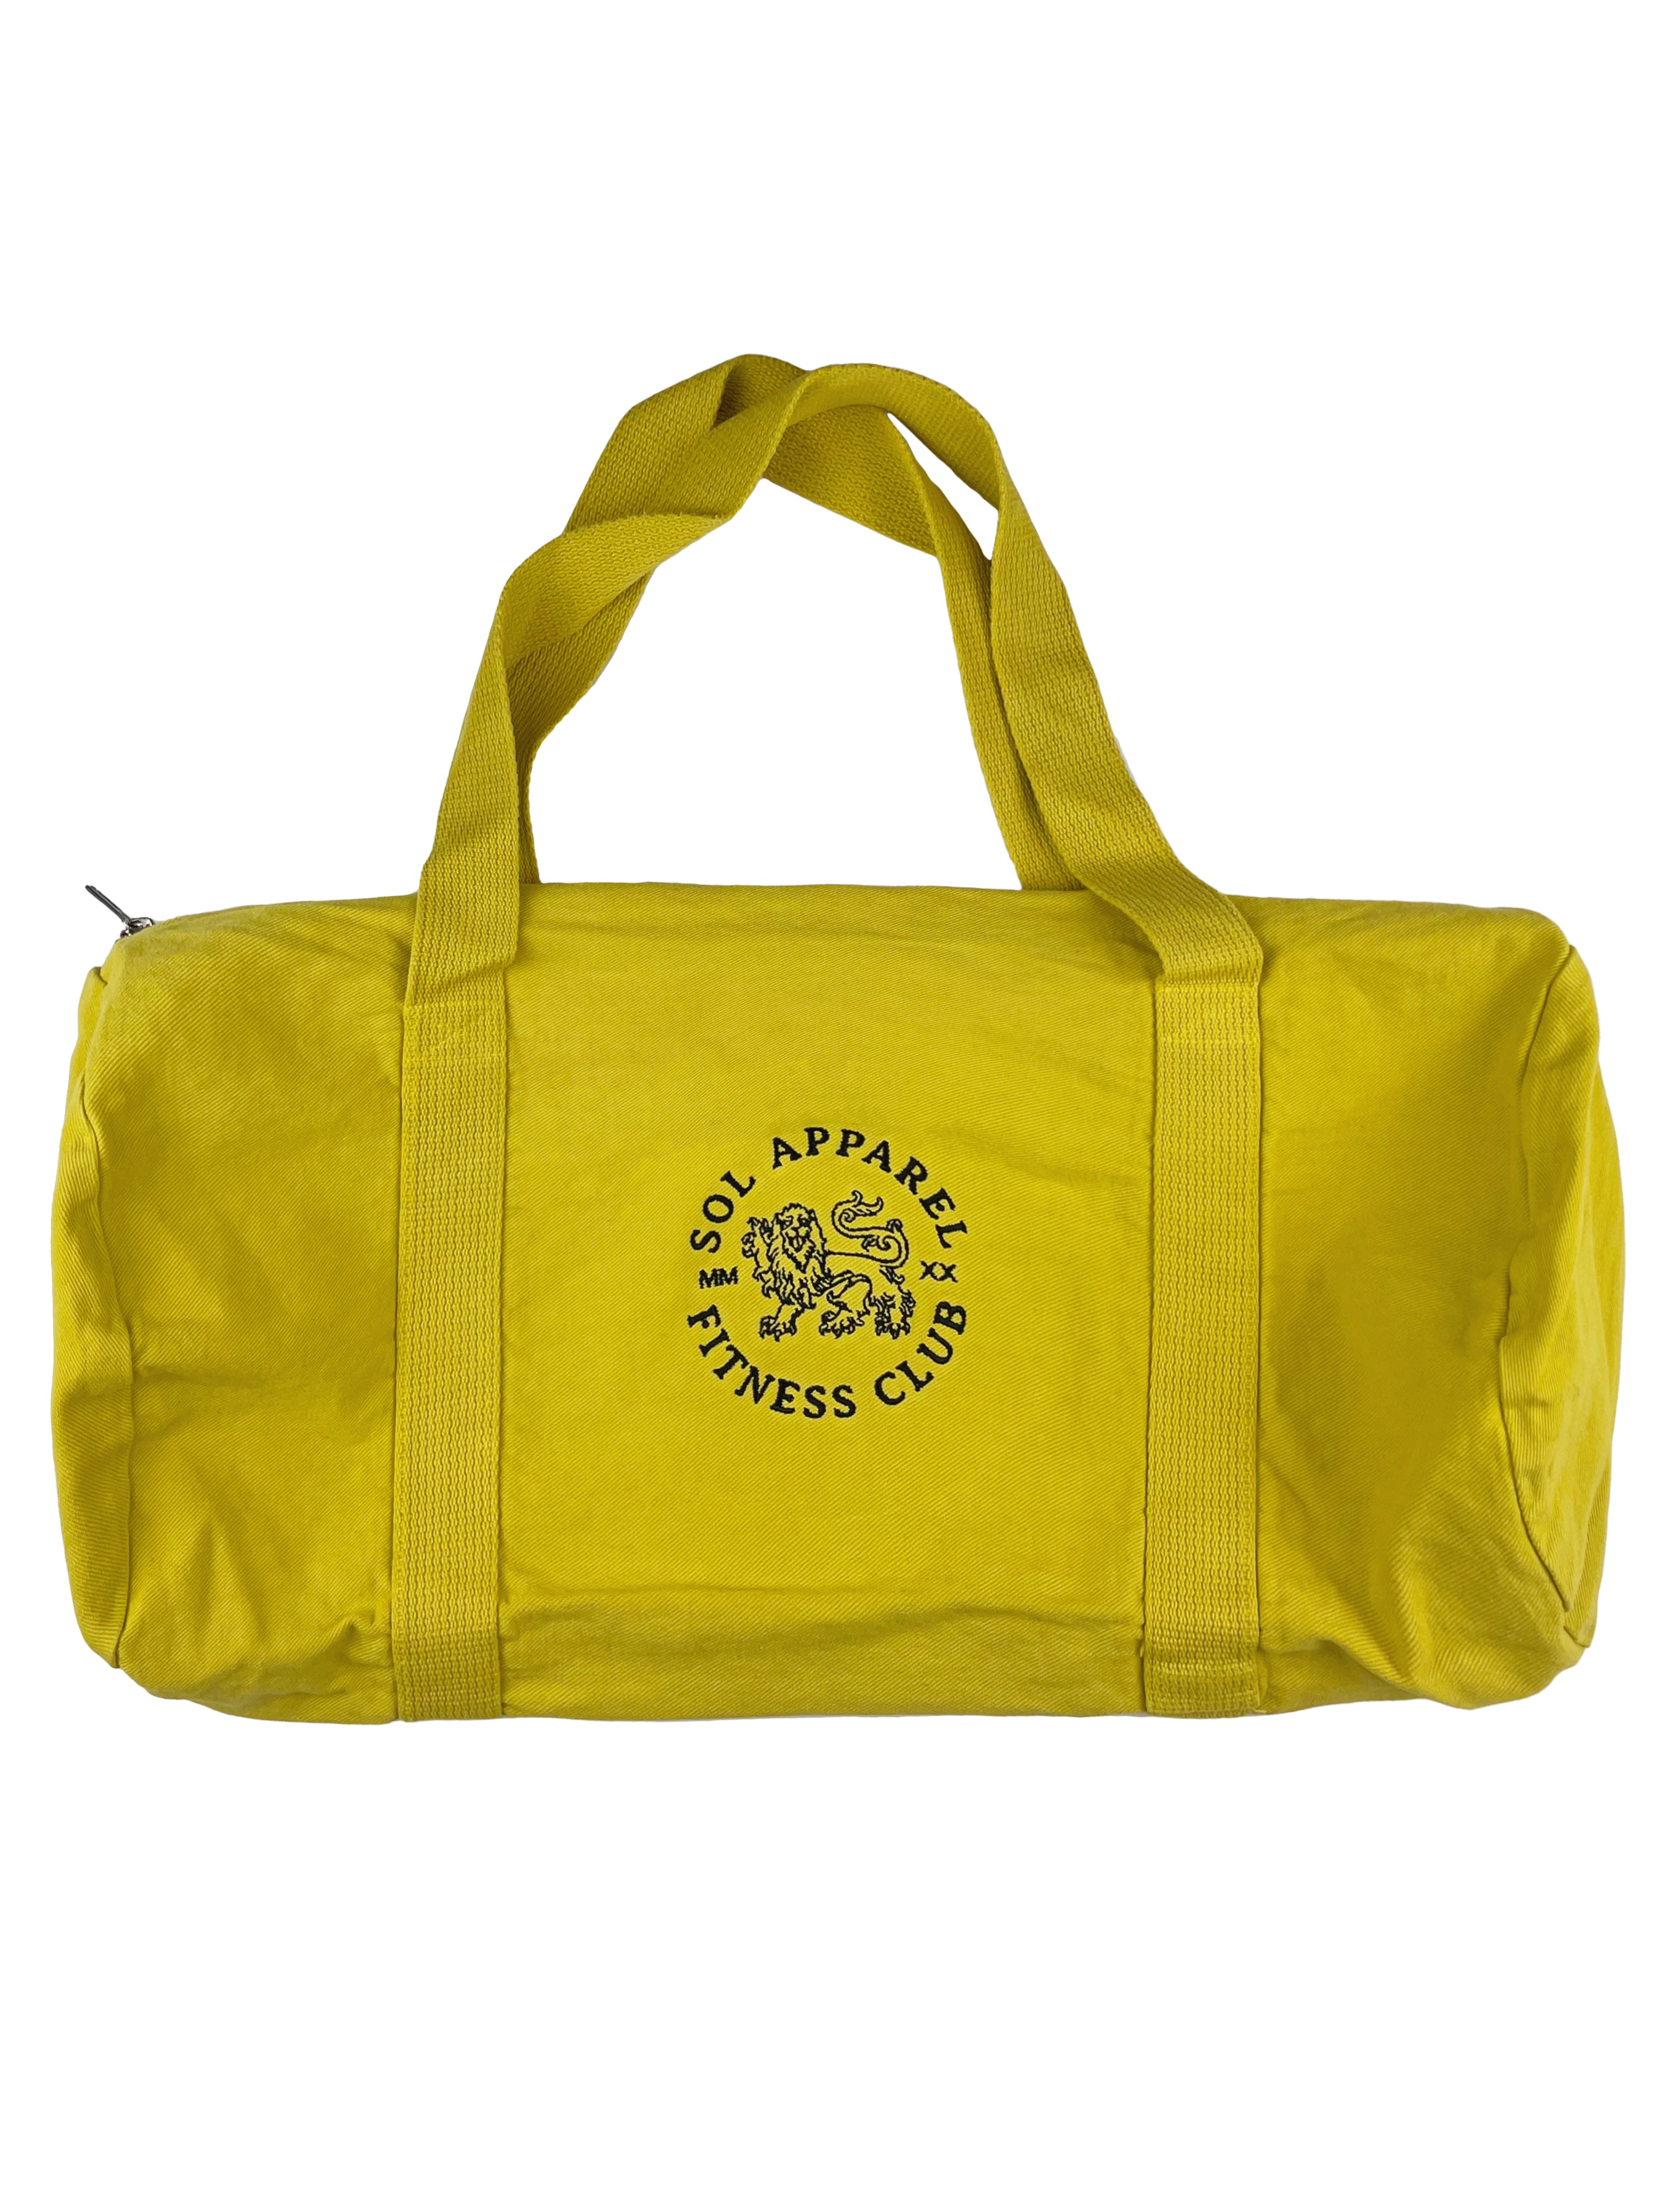 yellow cotton gym duffel bag with black logo of lion and text sol apparel fitness club embroidered on the side